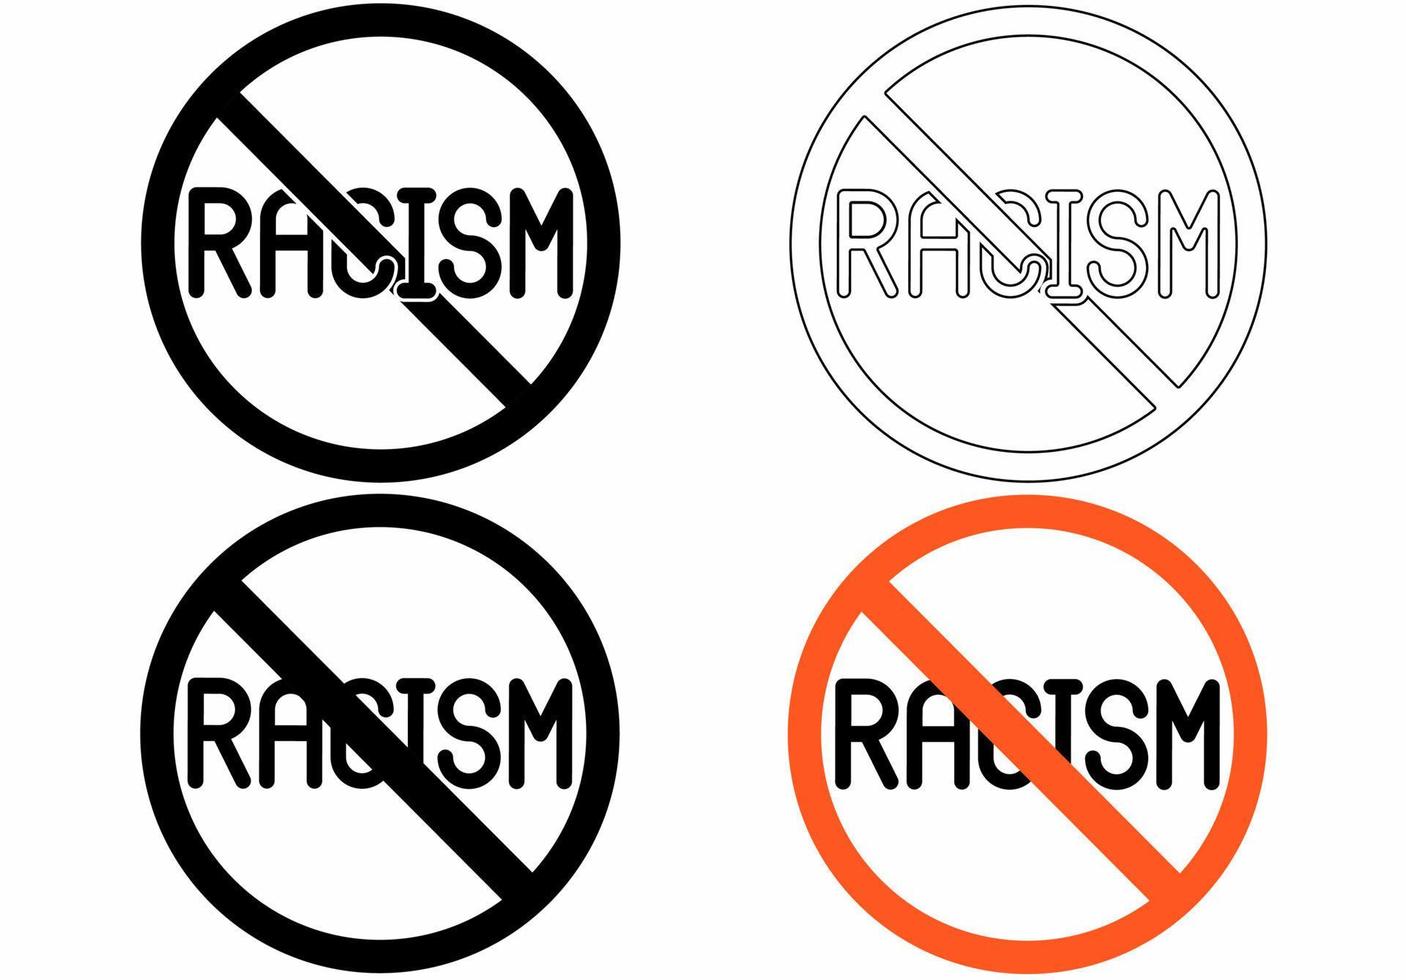 no racism sign set isolated on white background vector